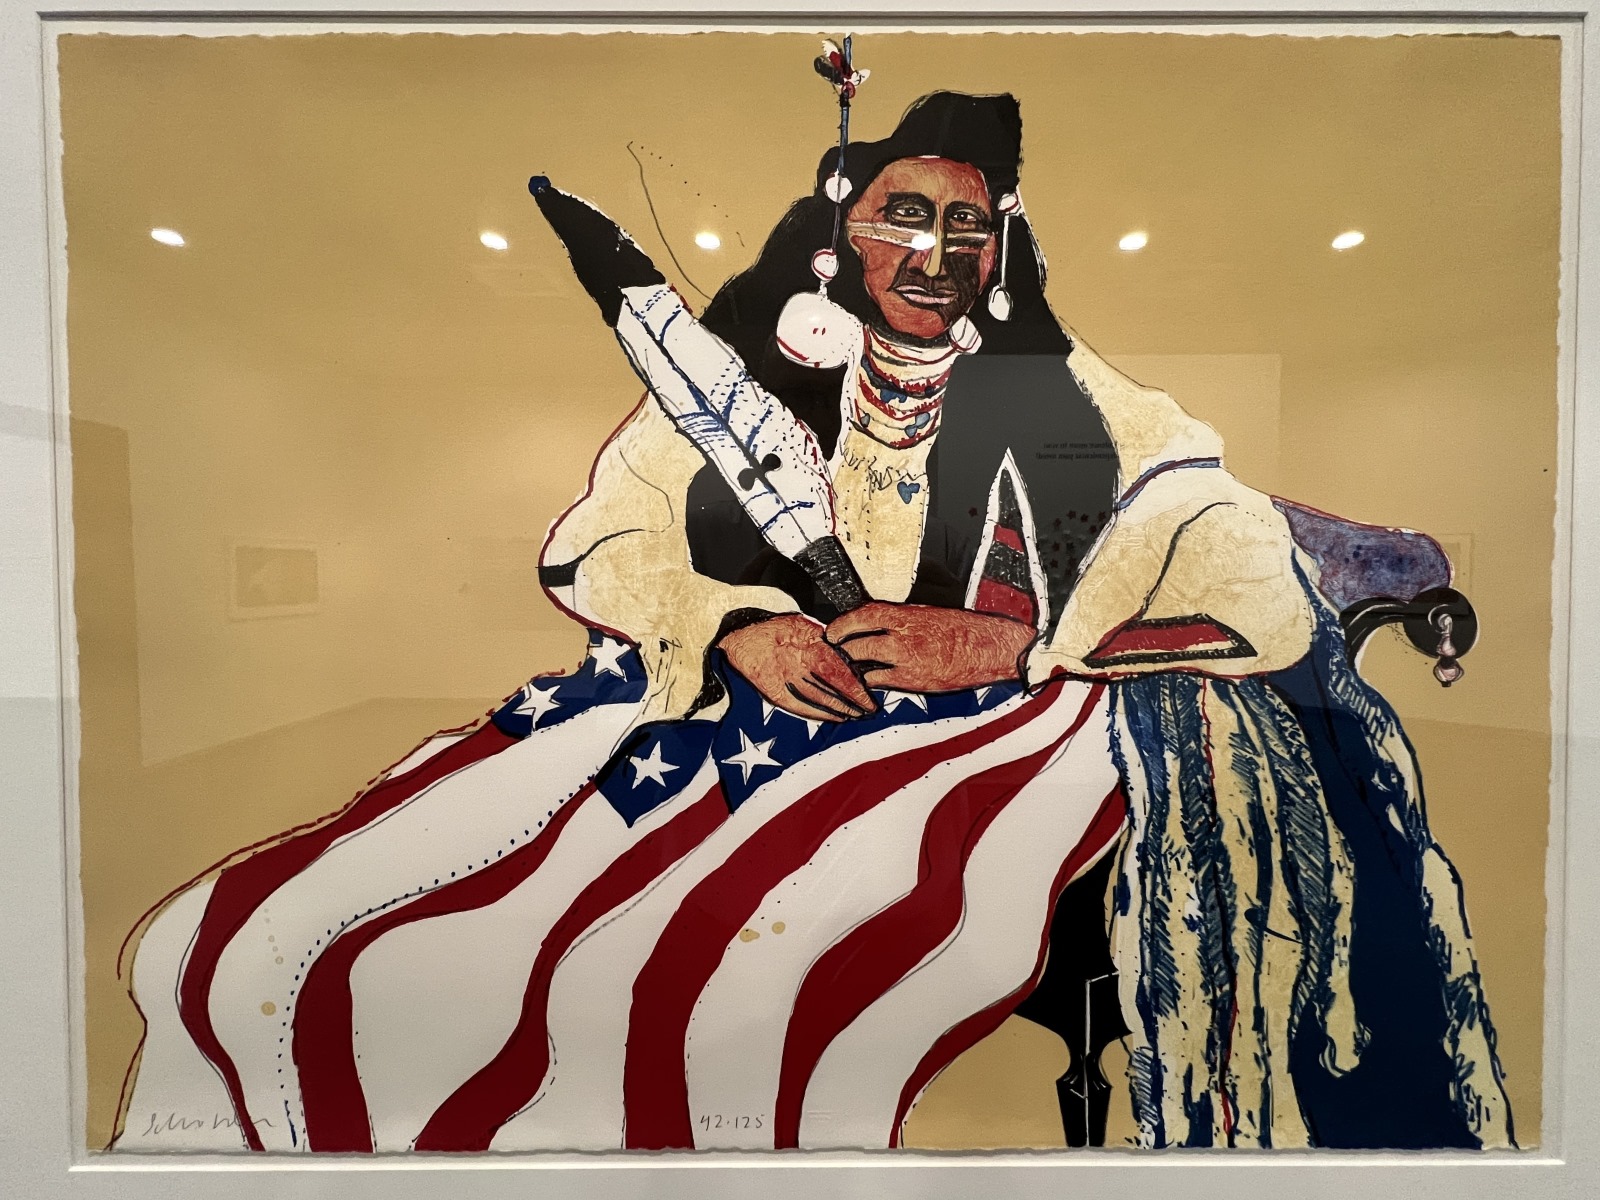 A painting of a Native American with a United States flag on their lap